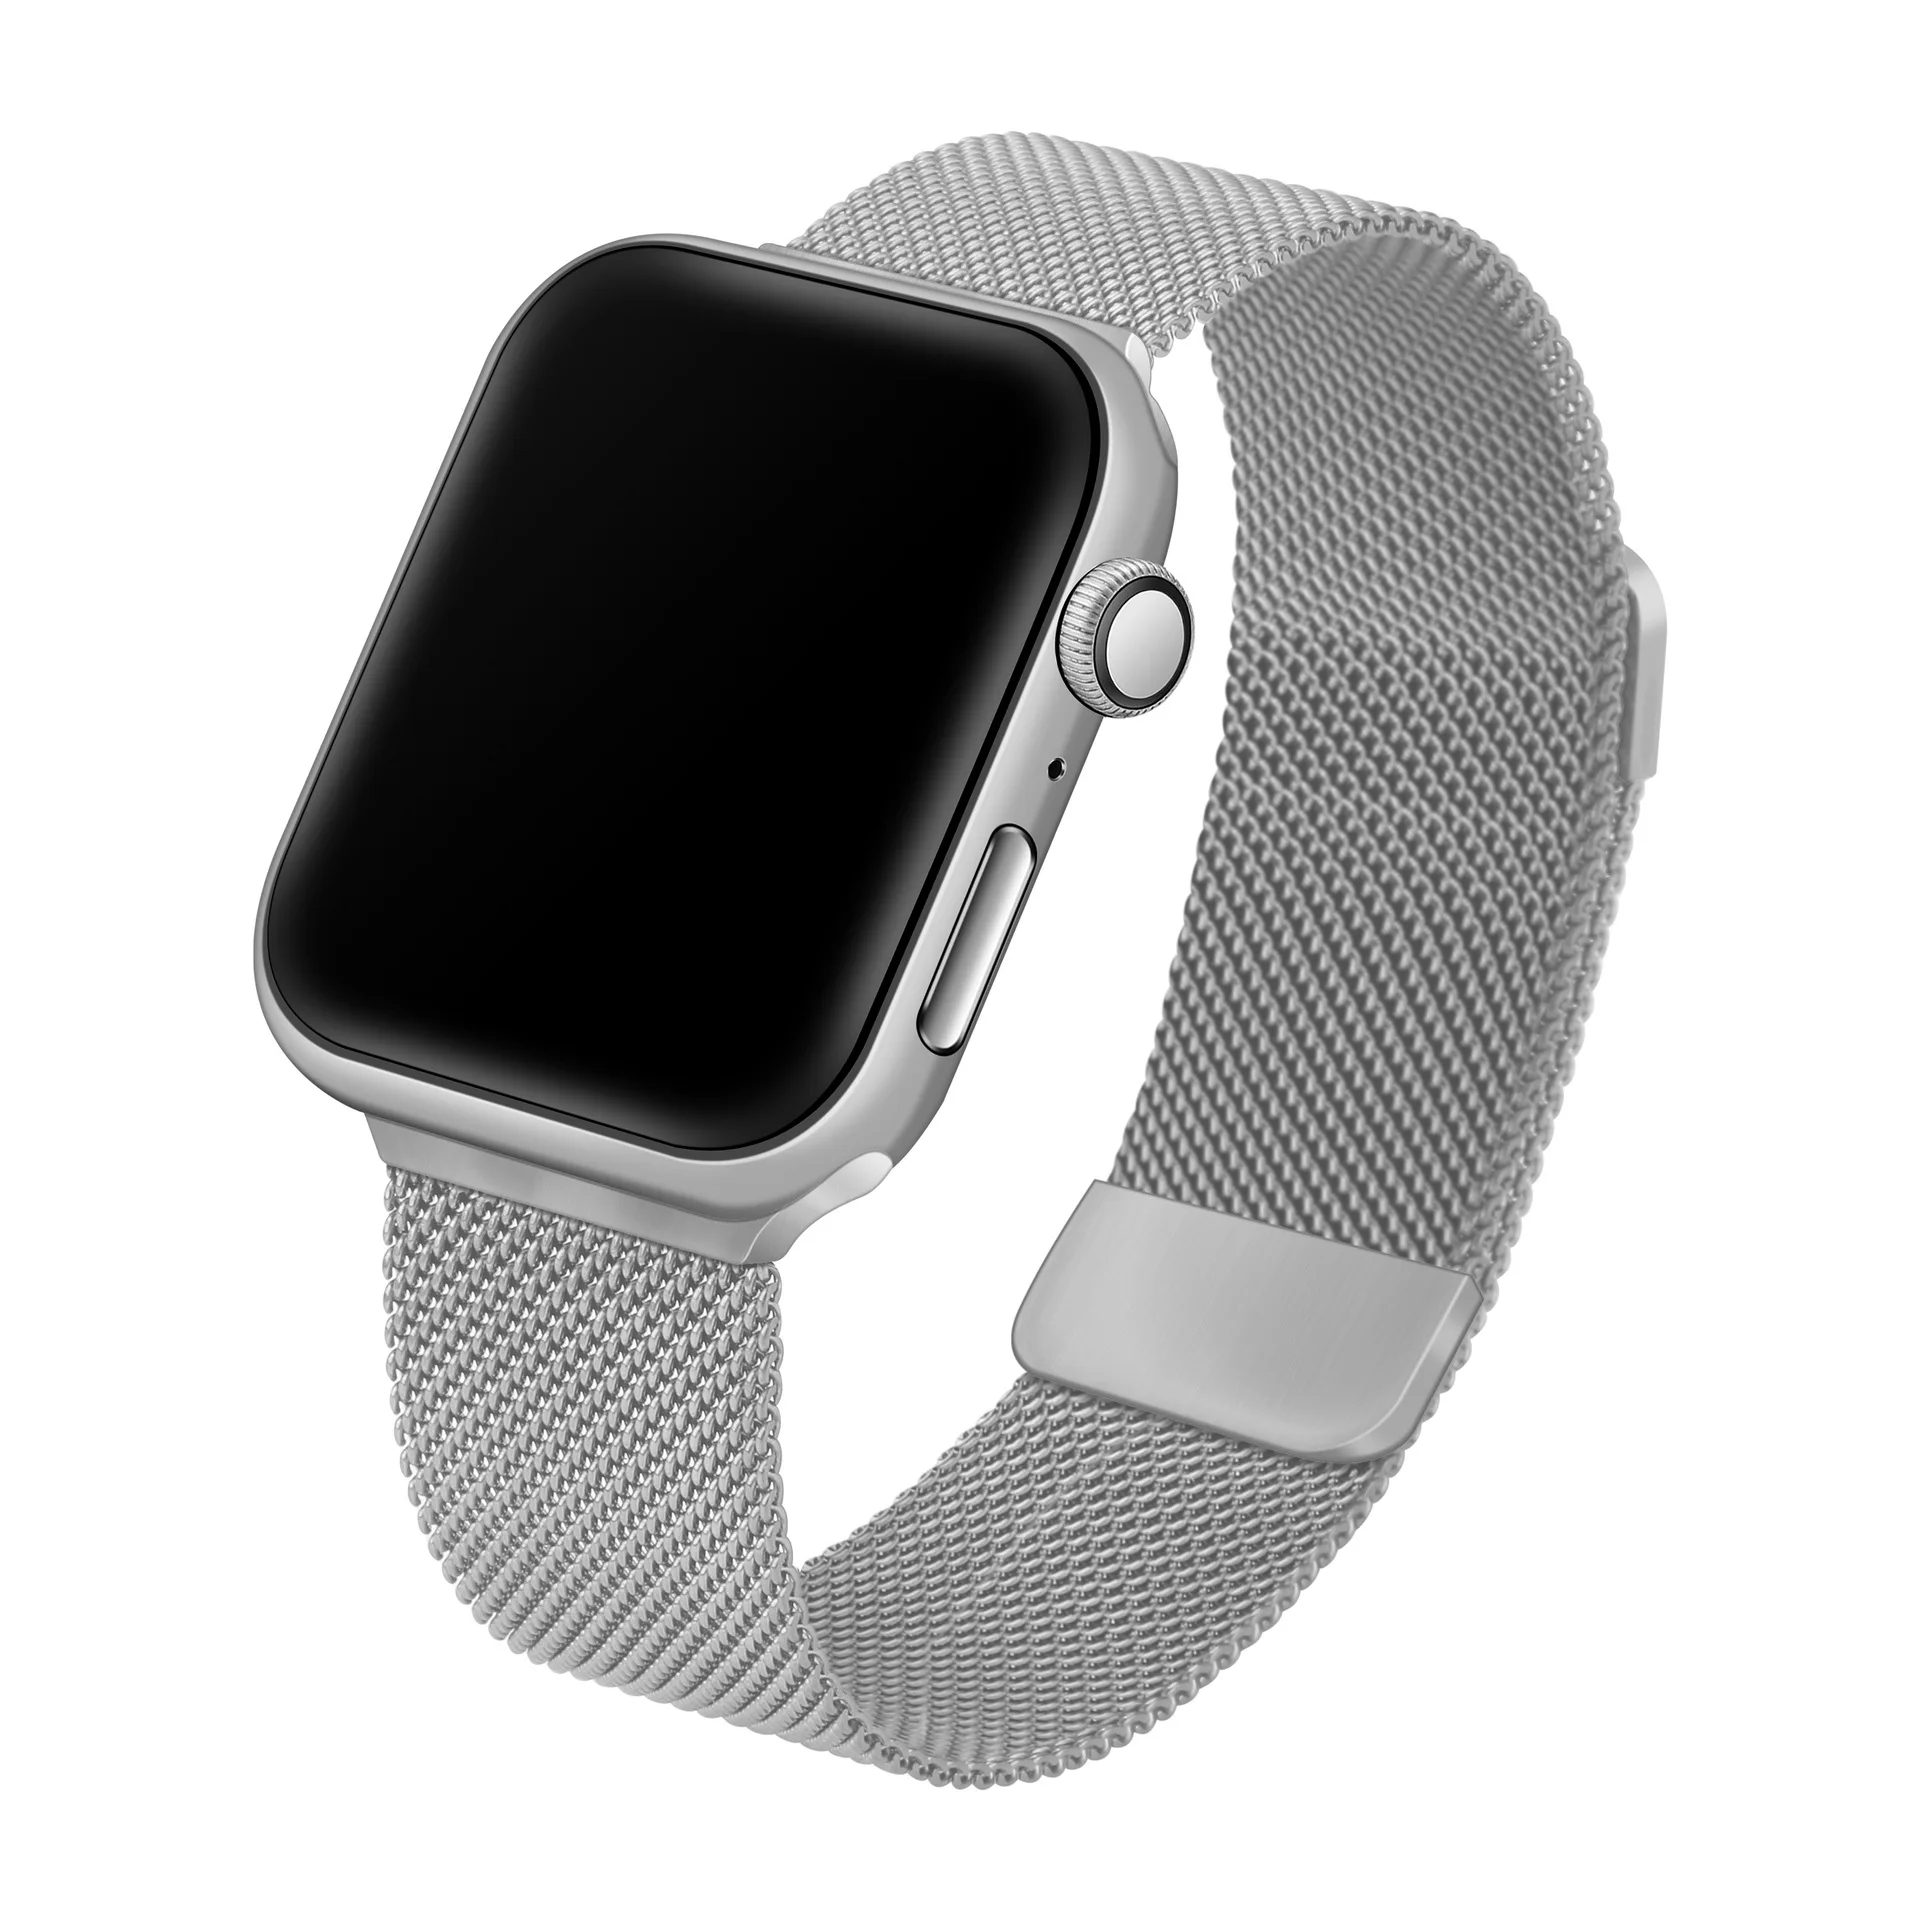 

LeYi Stainless Steel Bracelet Metal Wrist Strap Milanese Loop Mesh Watch Band for Apple iWatch Series 4 5 6s 7 44MM 45MM Straps, Optional